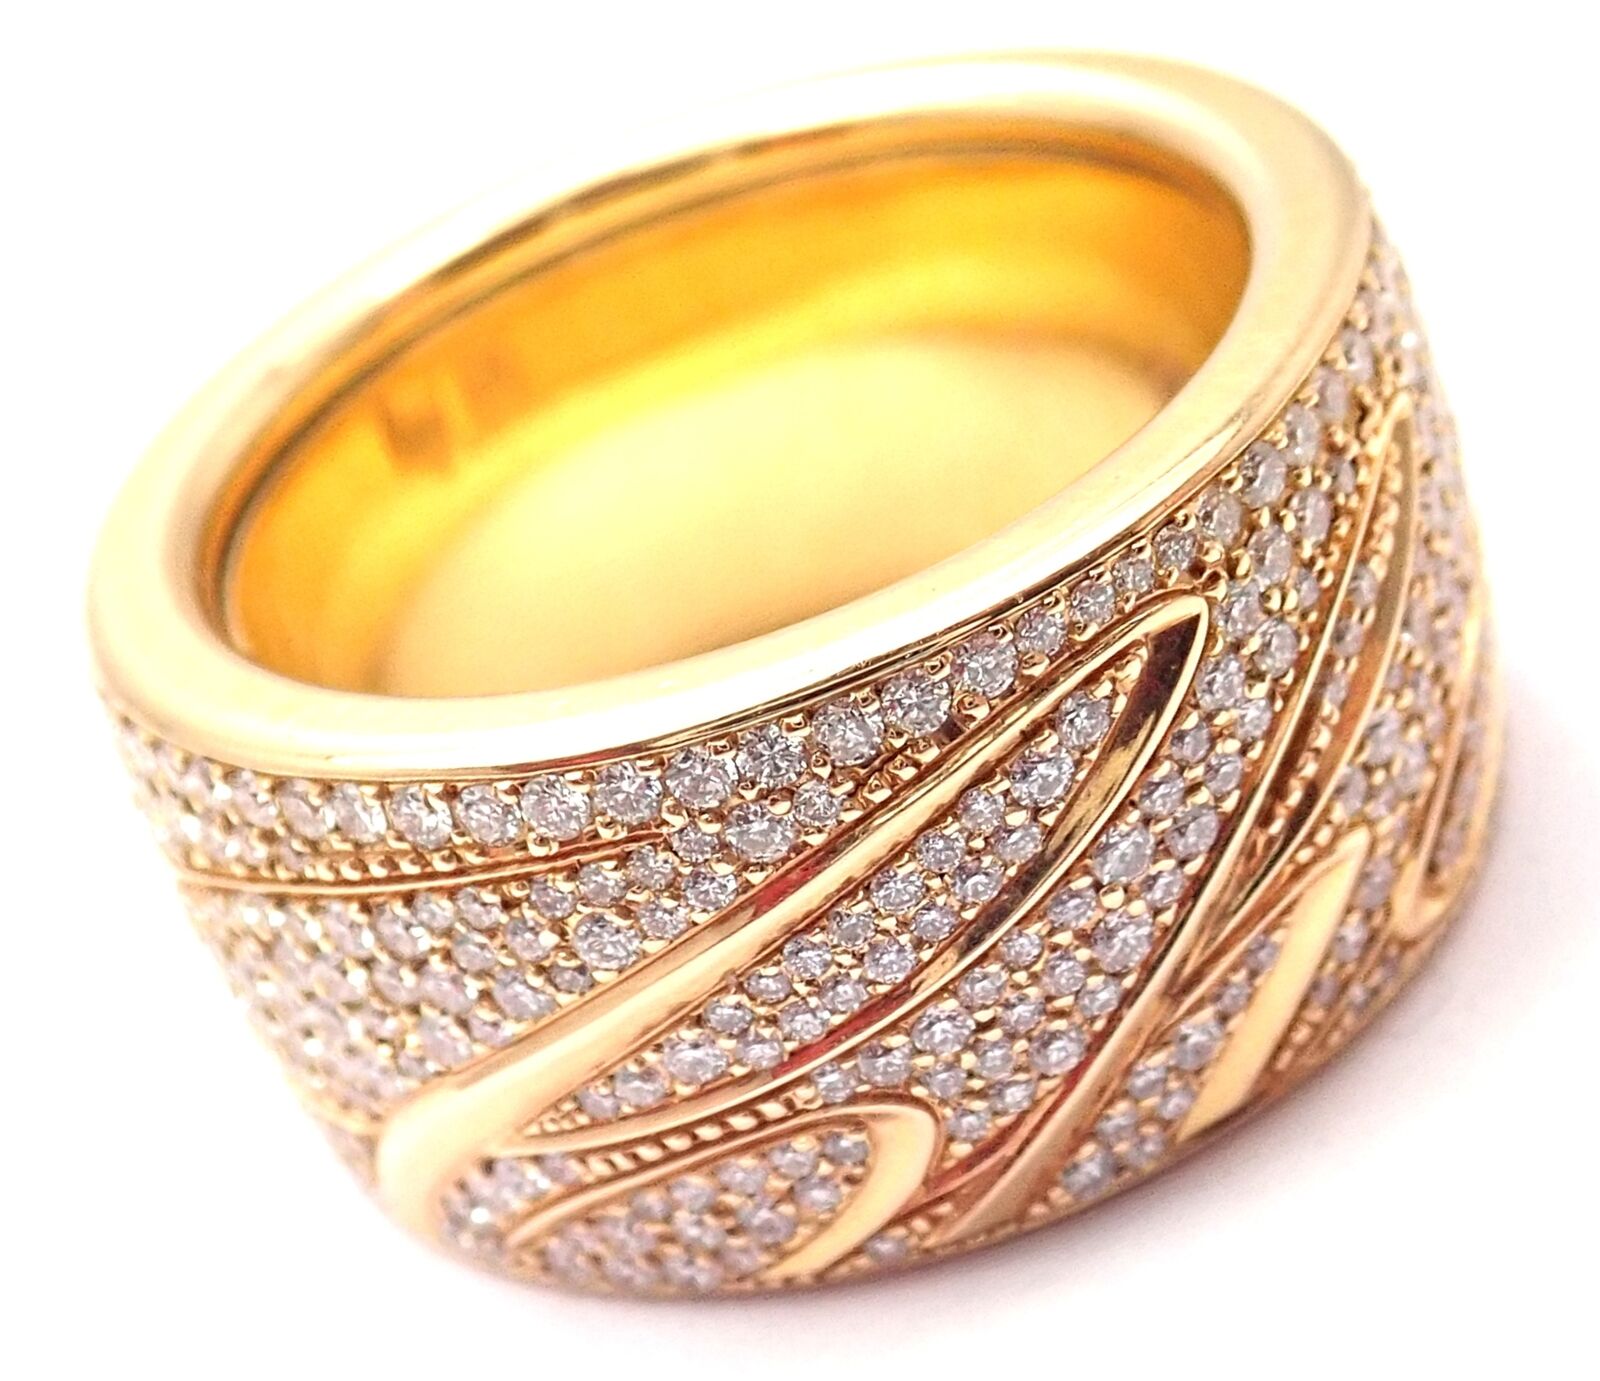 Color Blossom Signet Ring, Yellow Gold, White Gold And Diamonds -  Categories Q9M82C